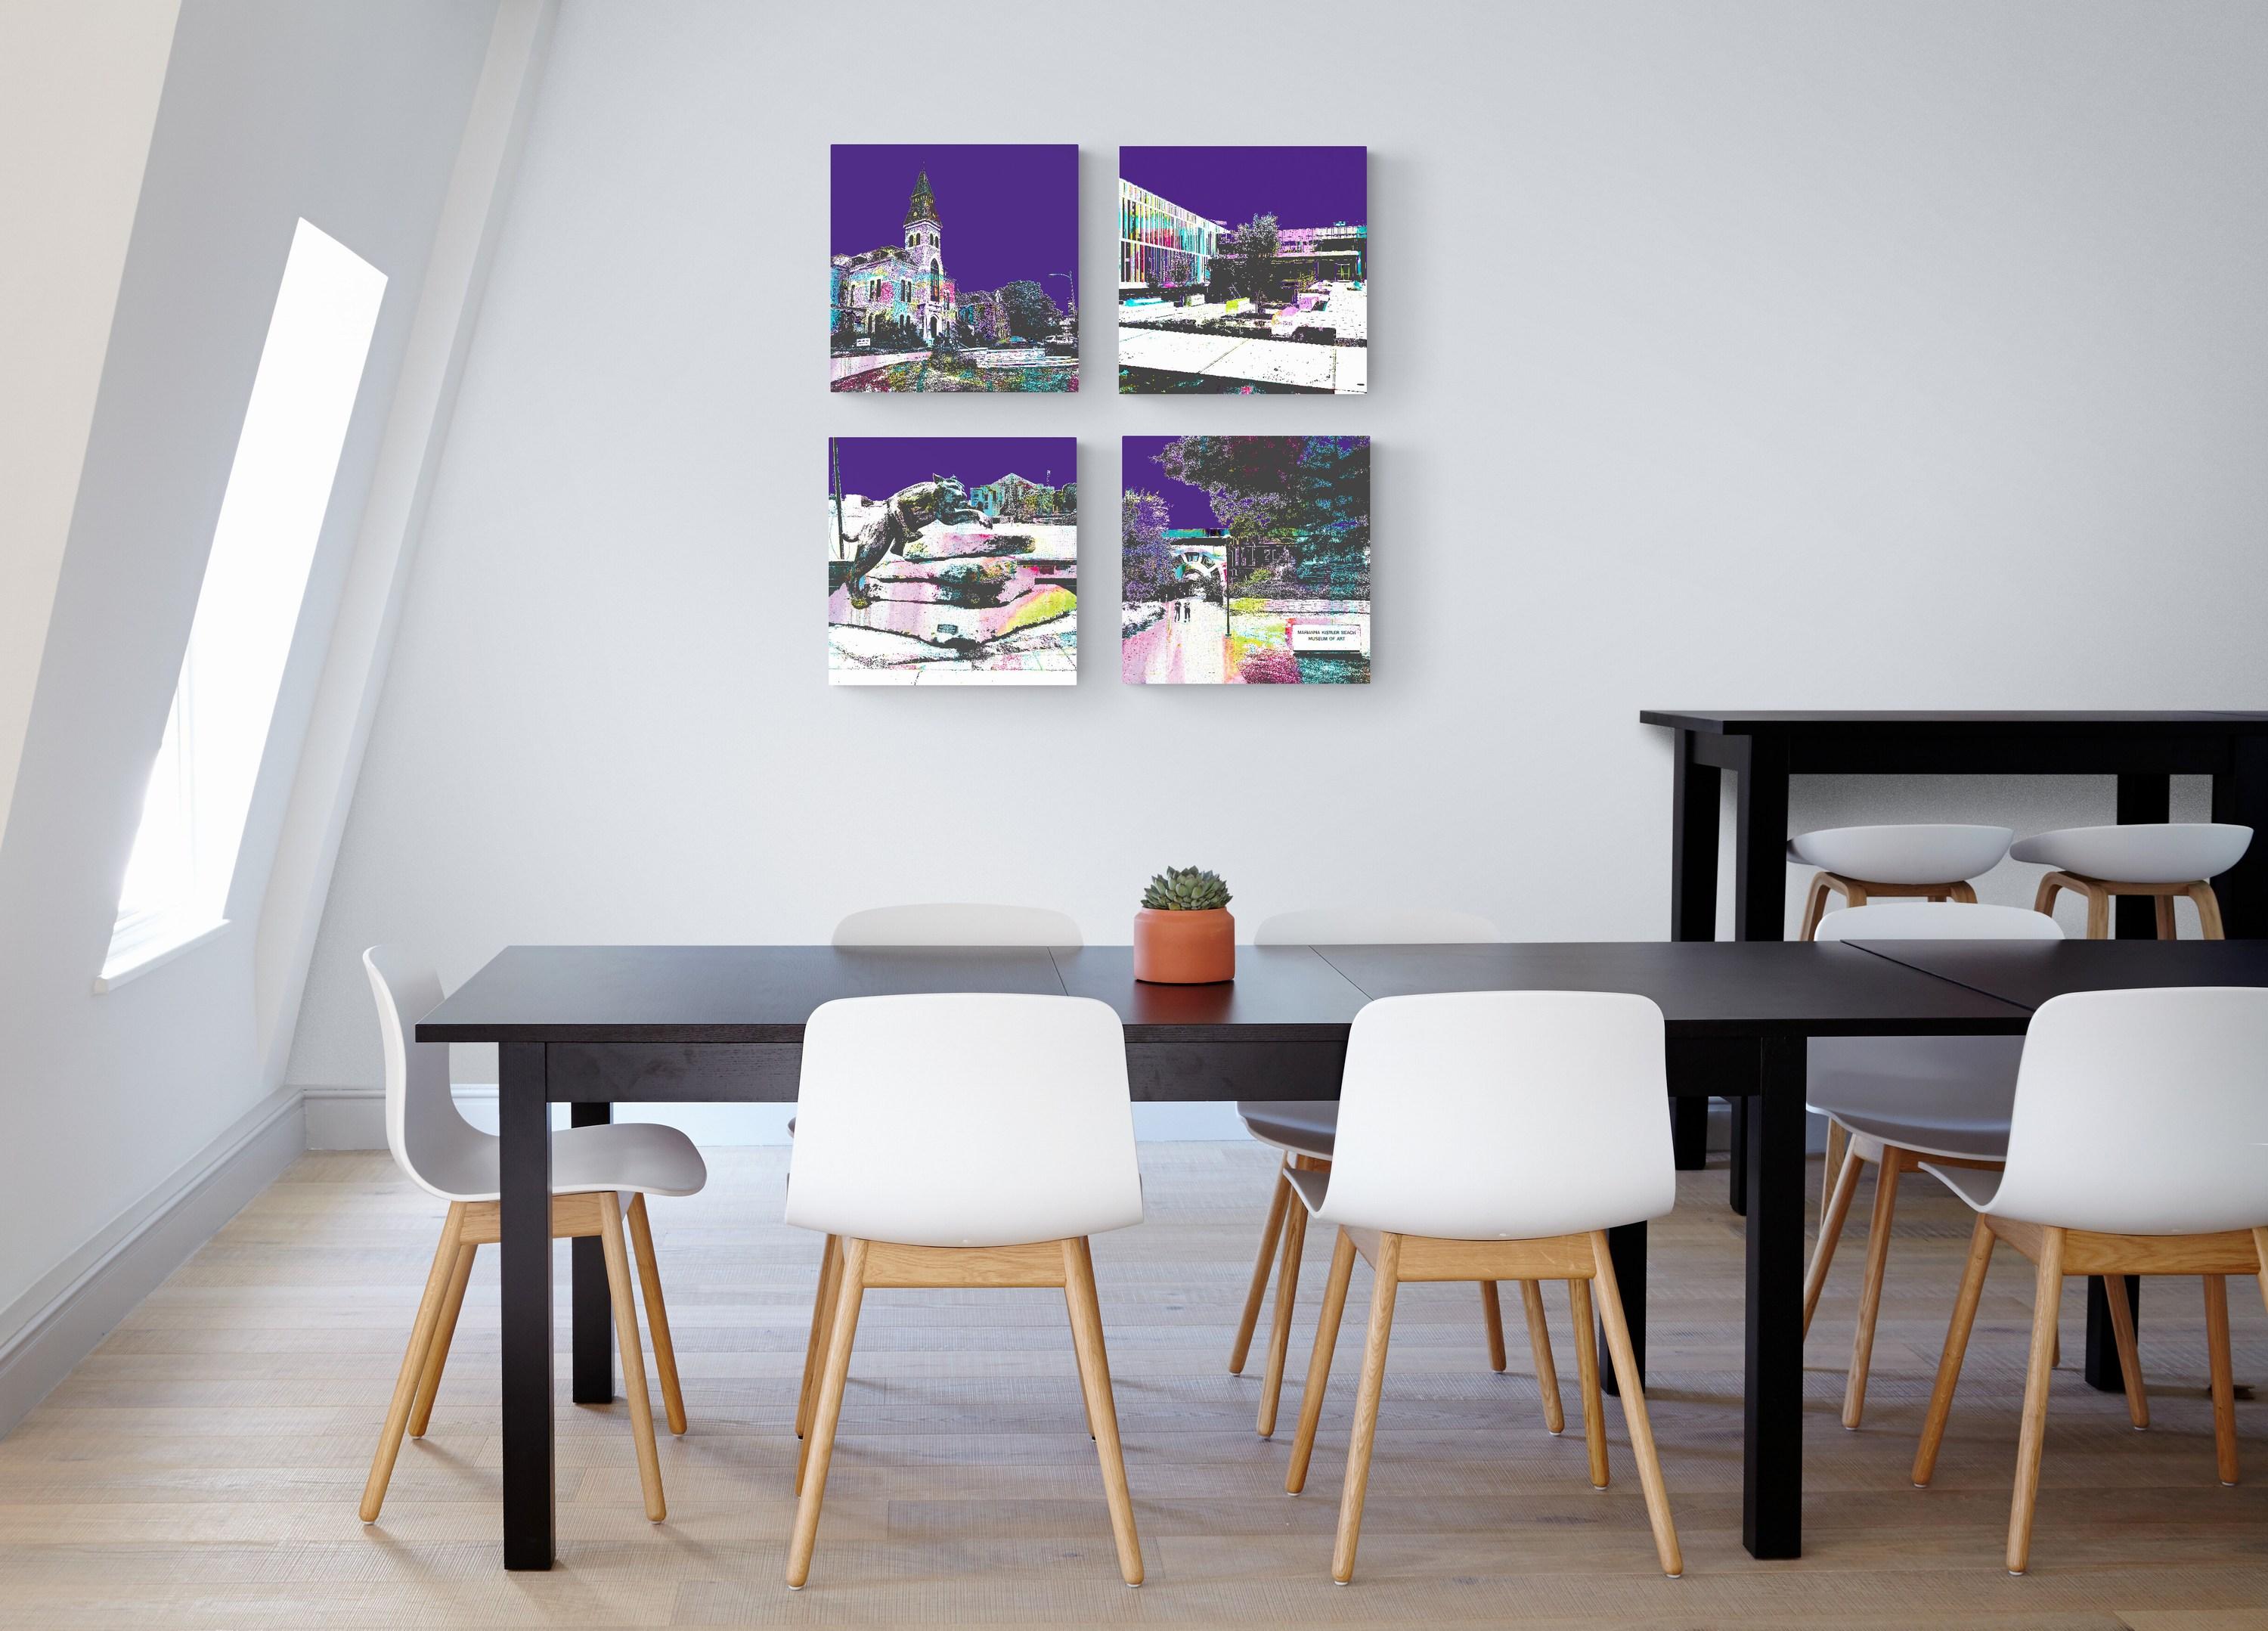 Katrina Revenaugh
“K-State Art Museum”
Dye Sublimation Print on Aluminum, 2024
Size Options: 12 x 12 inches, 20 x 20 inches or 30 x 30 inches
Edition: 75 + AP
Signed and titled on label provided separately
COA included

Tags: #ArtisticExpression